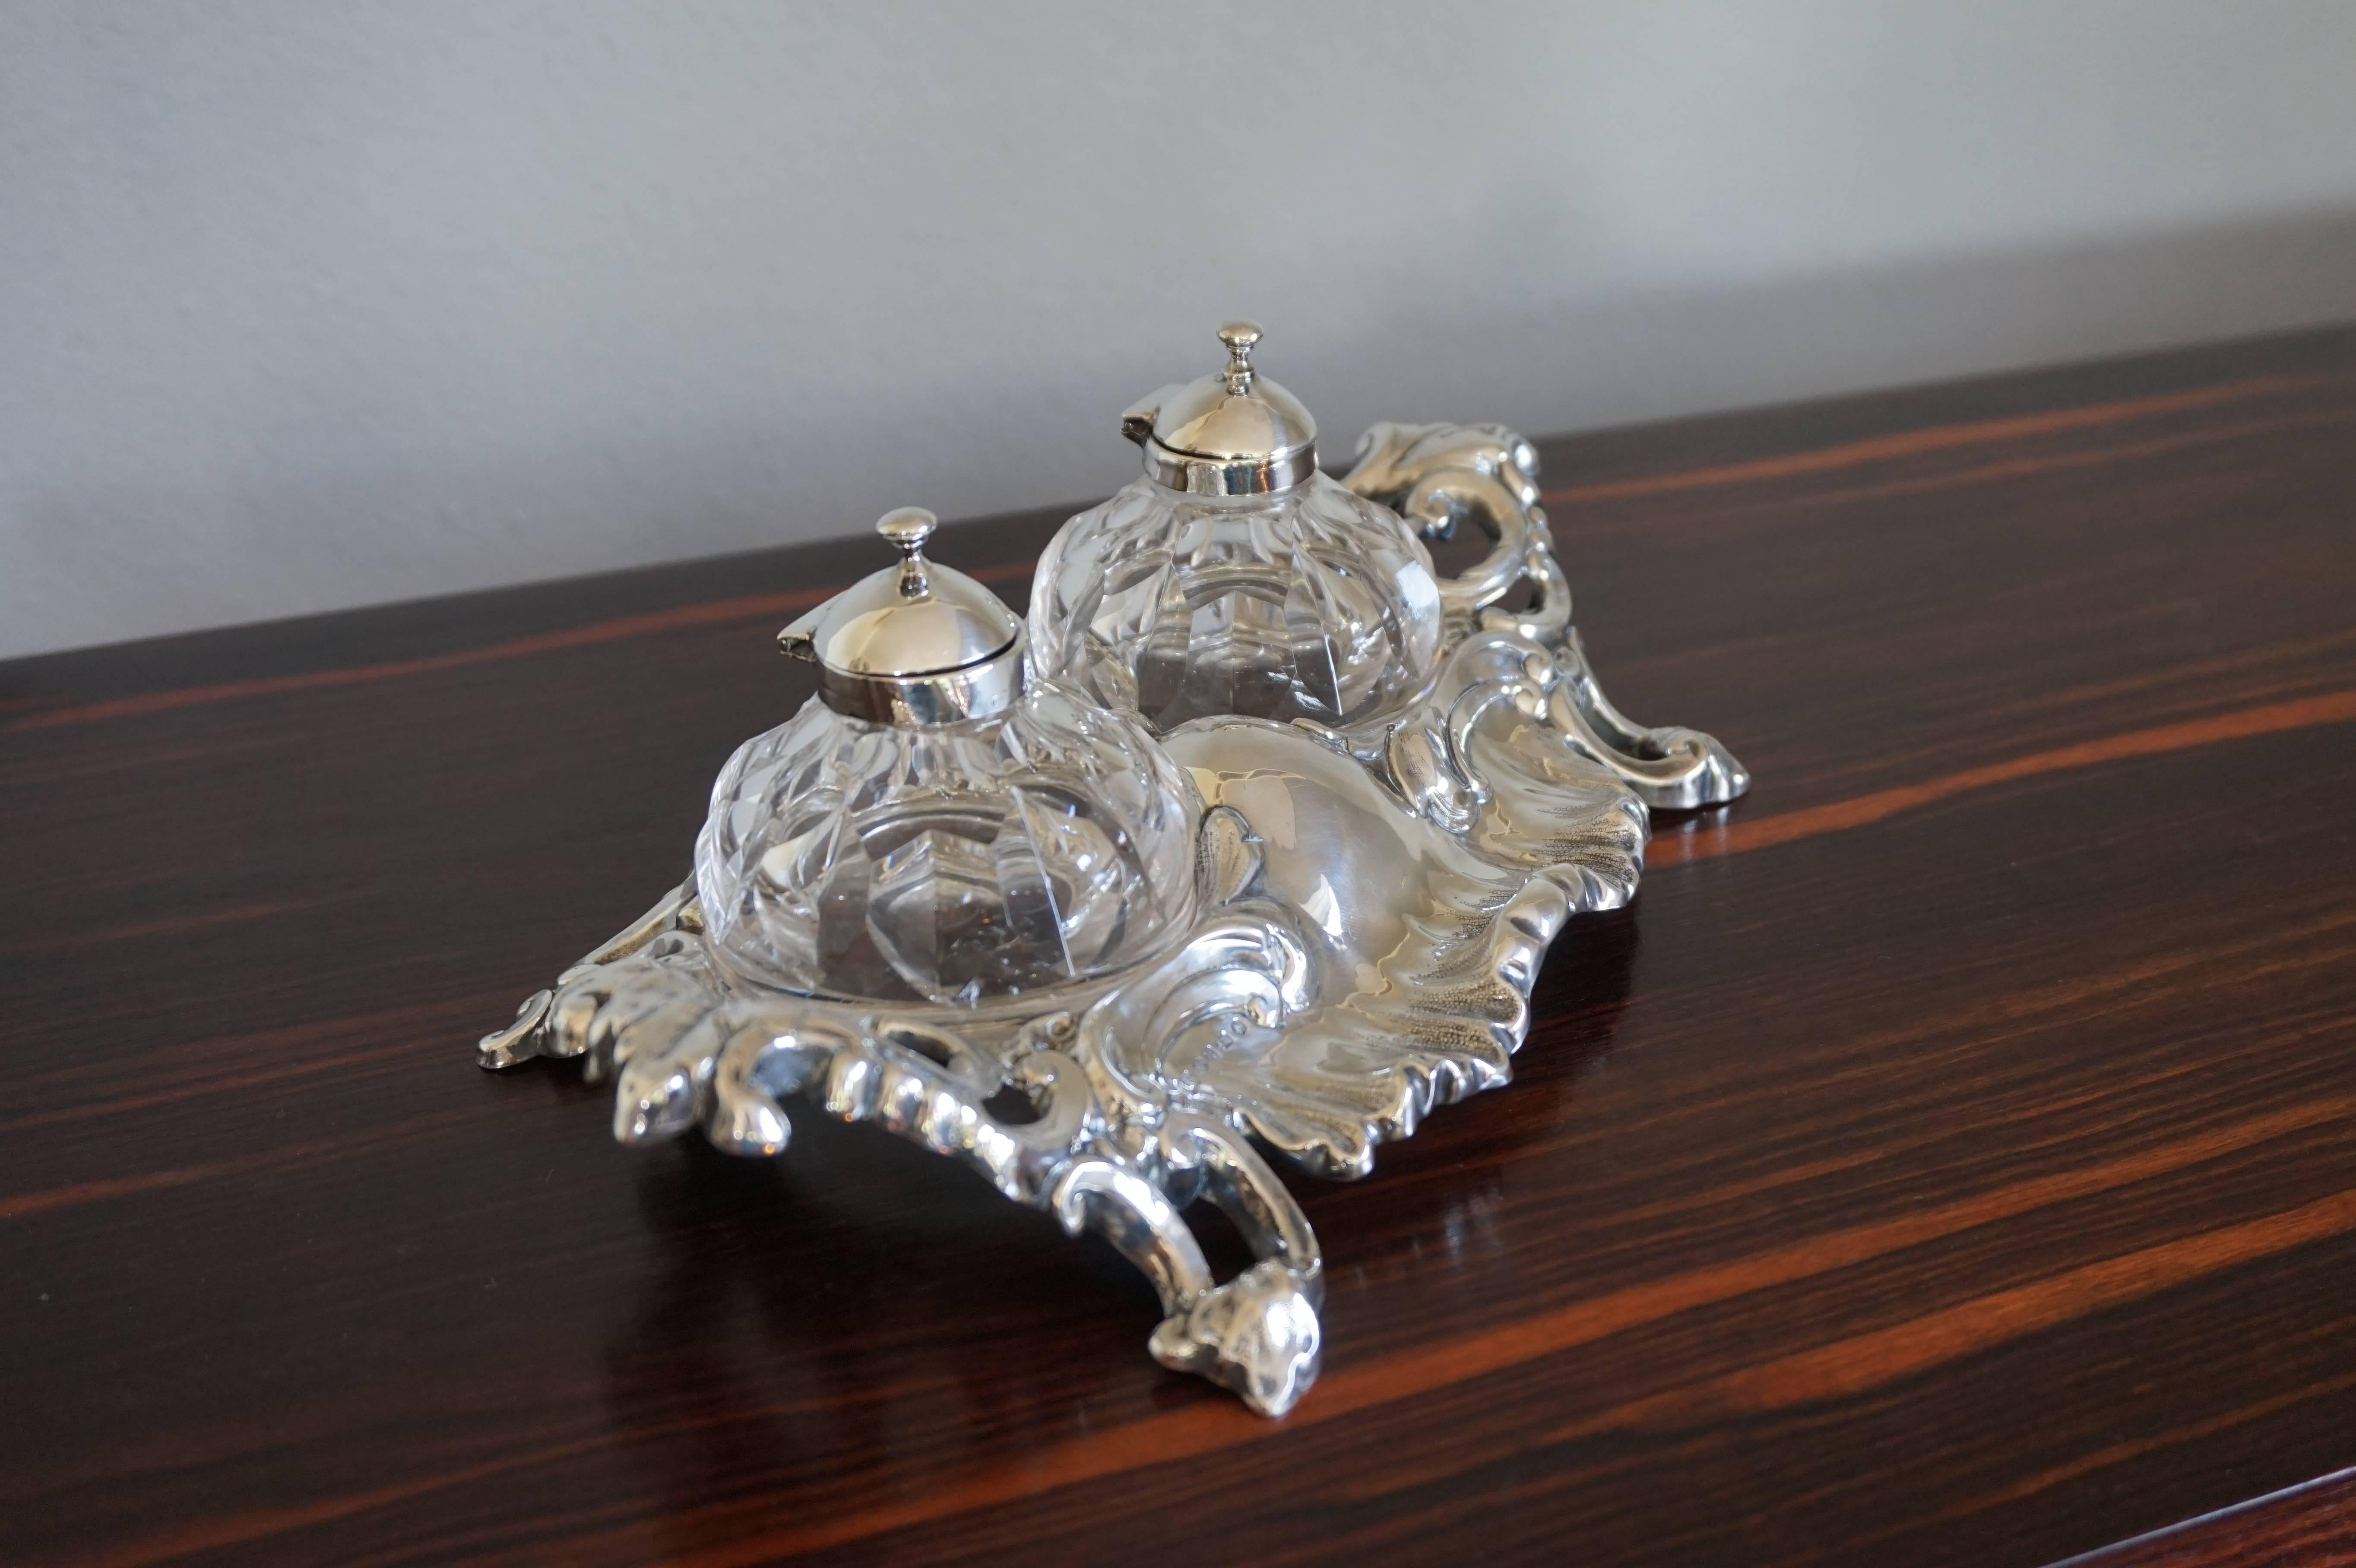 Stunning inkstand in wonderful condition.

For those who prefer the finer things in life we also have this wonderful and extremely elegant inkstand. It is made of sterling silver and the handcrafted and all original inkwells with their silver lids